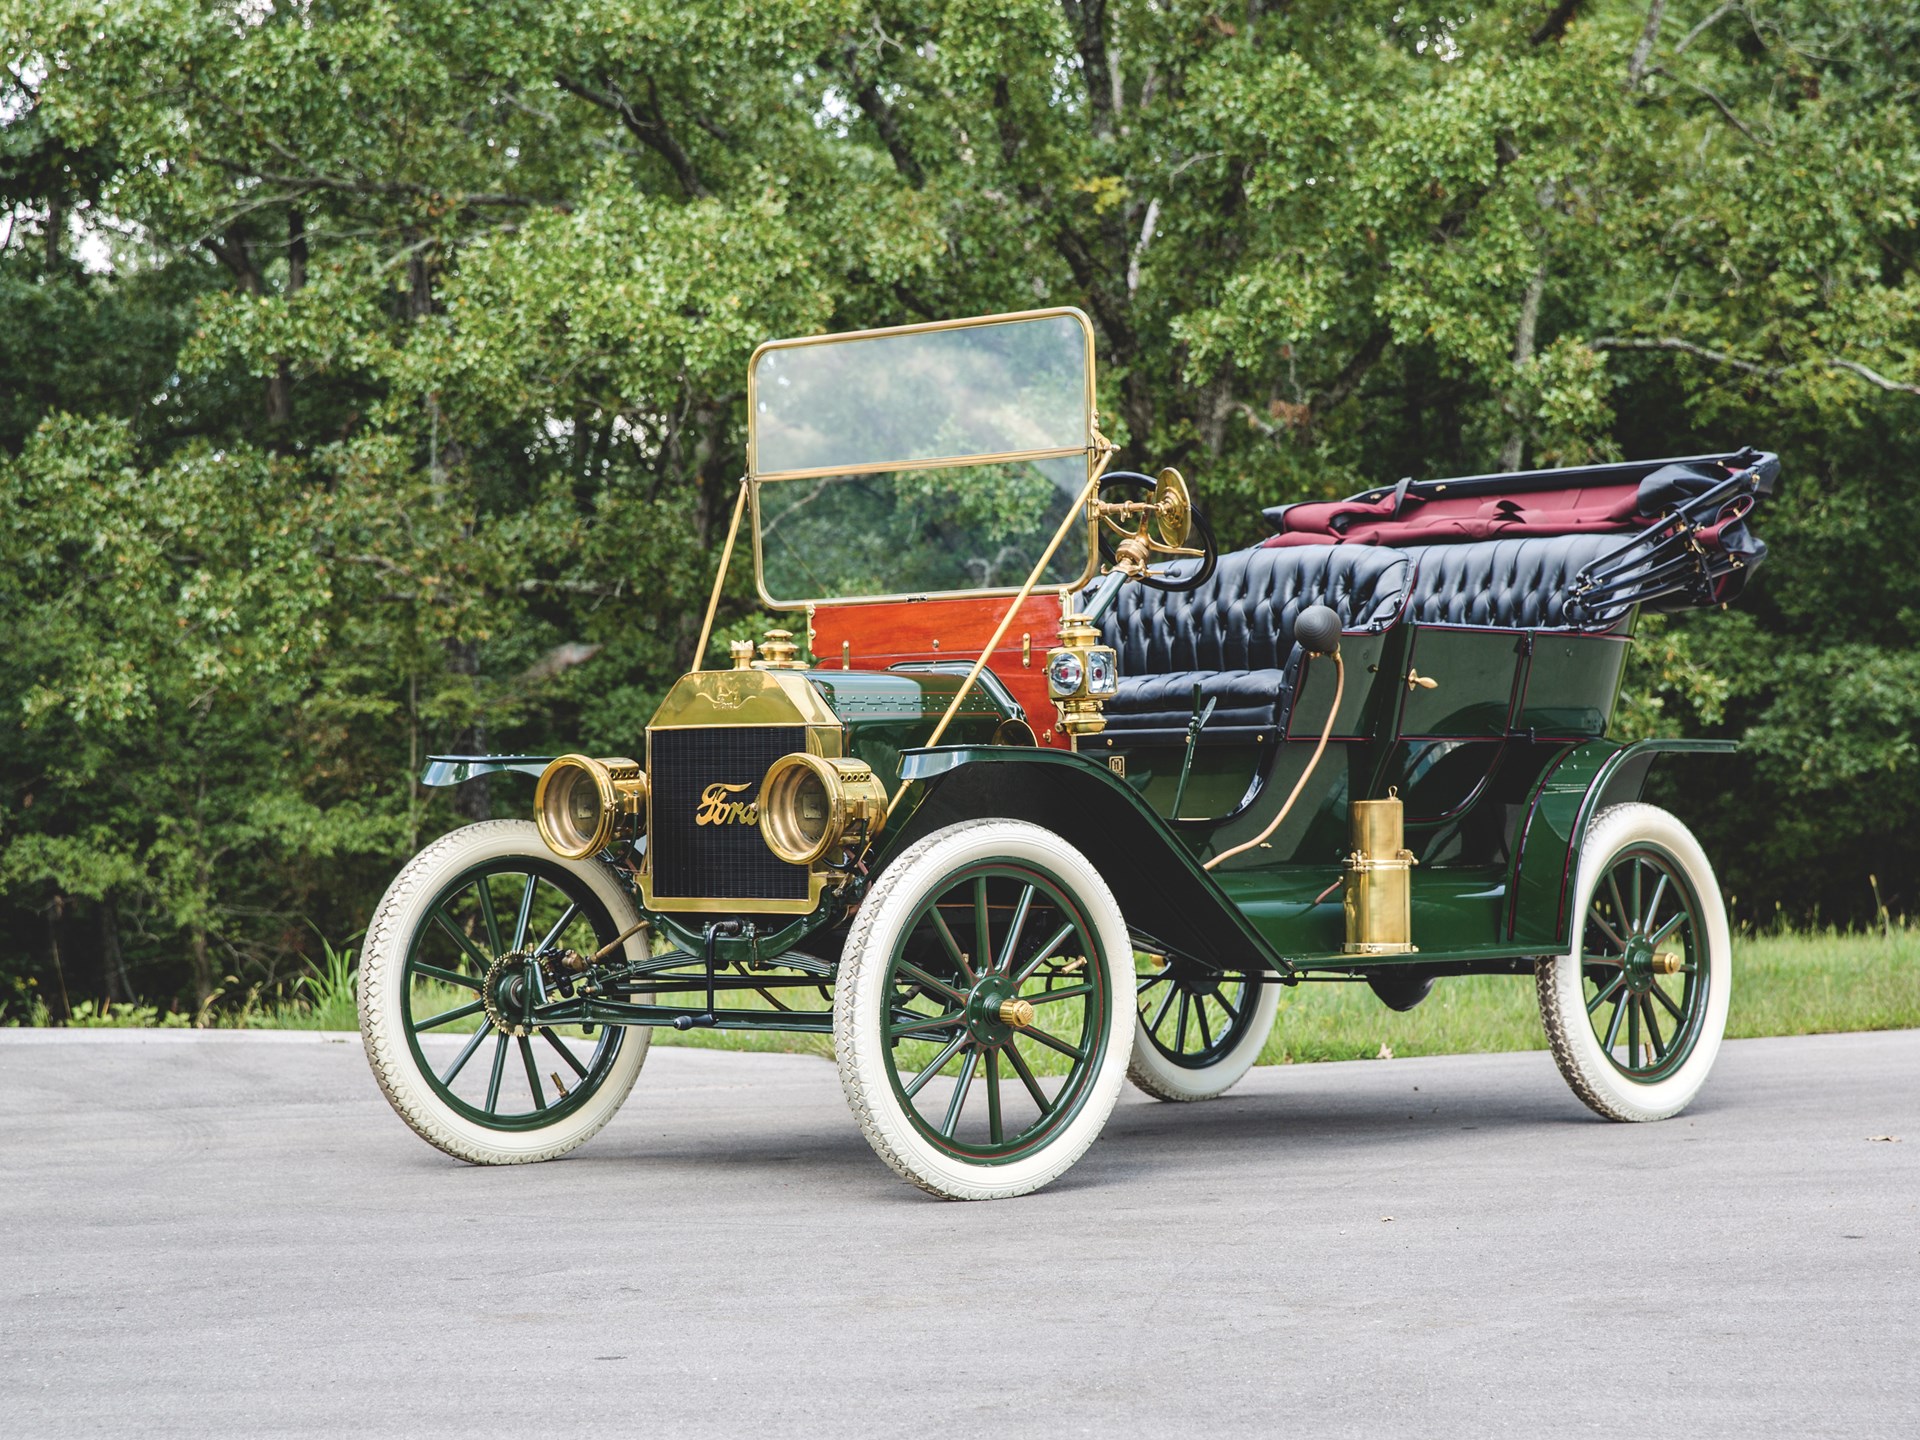 Ford T Touring 1910 rmsothebys com 985fbb702c05b0f55ce2a26d2465439aba443ad3